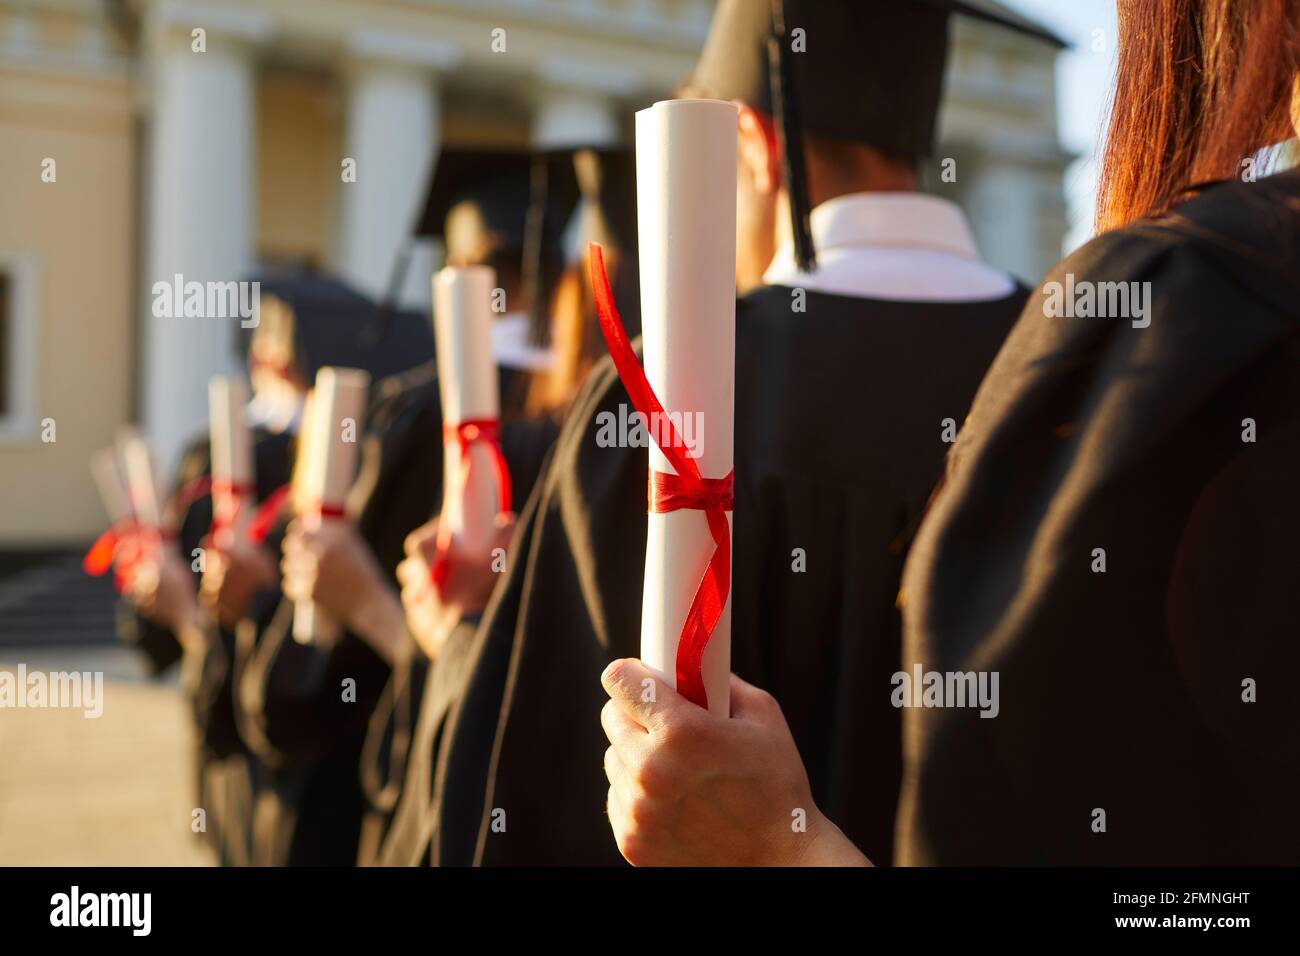 Graduate.Selective focus on degree diploma certificate in hand of student standing in row Stock Photo